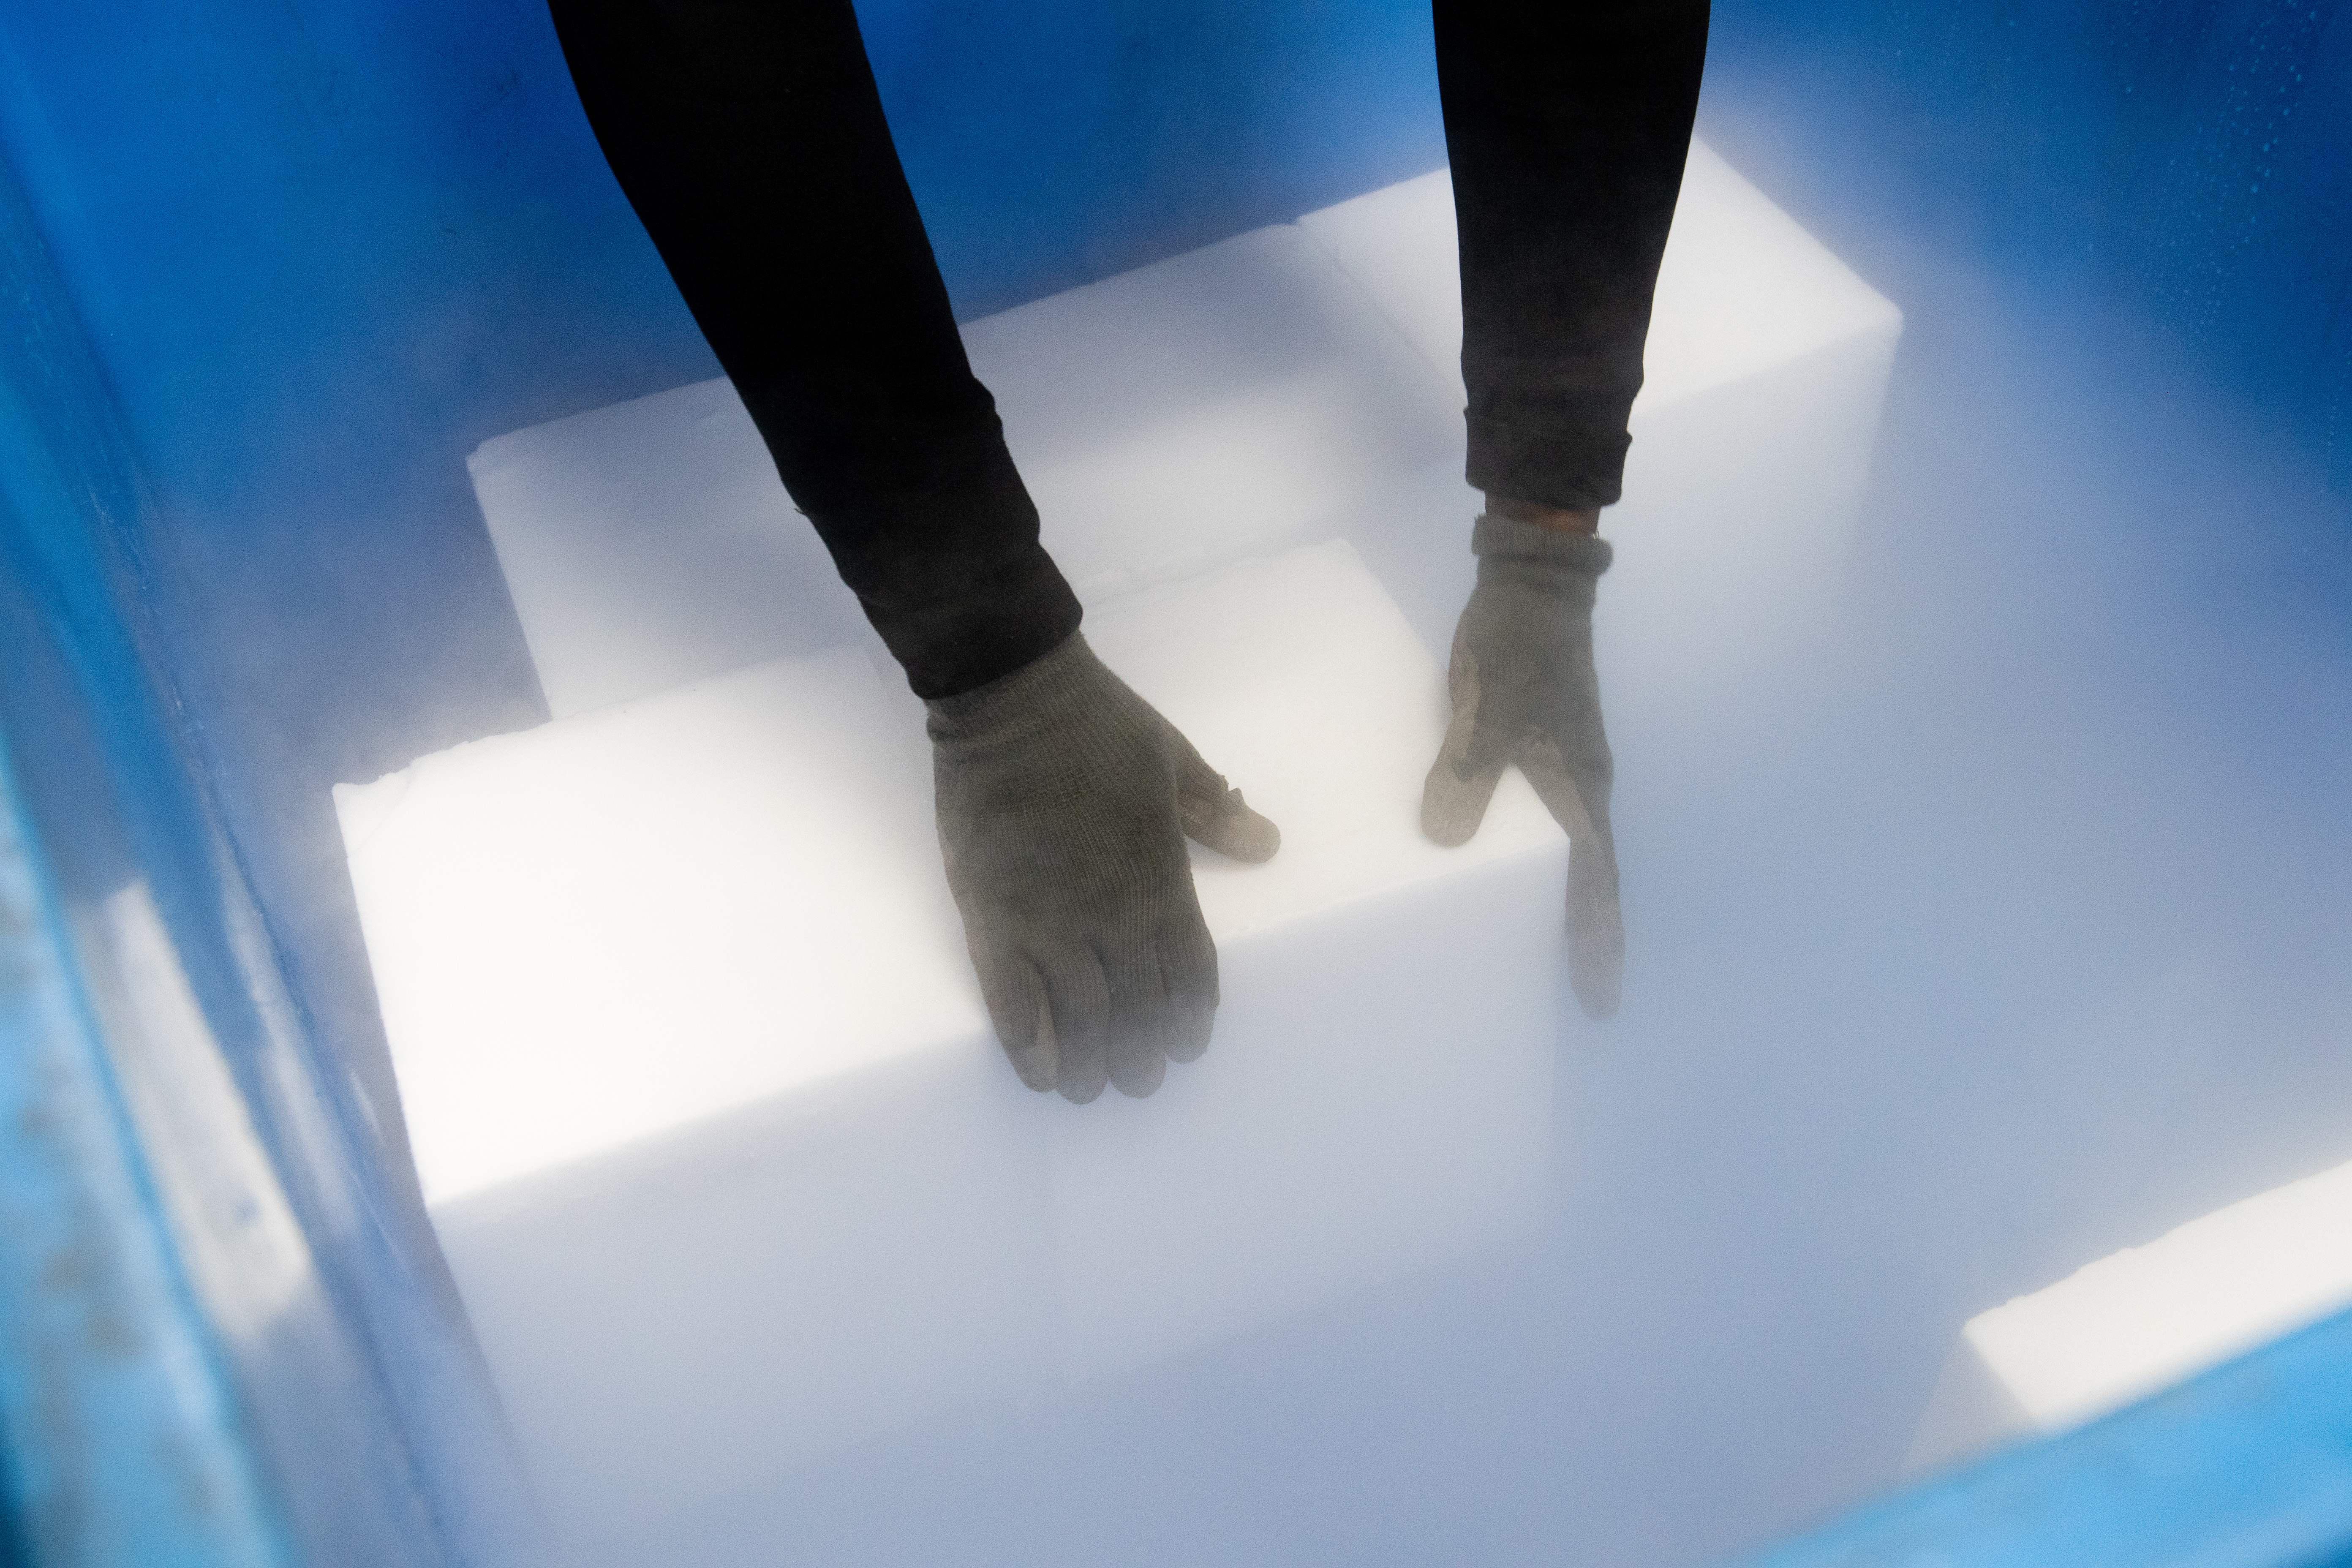 Gloved hands reach inside a cooler to place blocks of dry ice